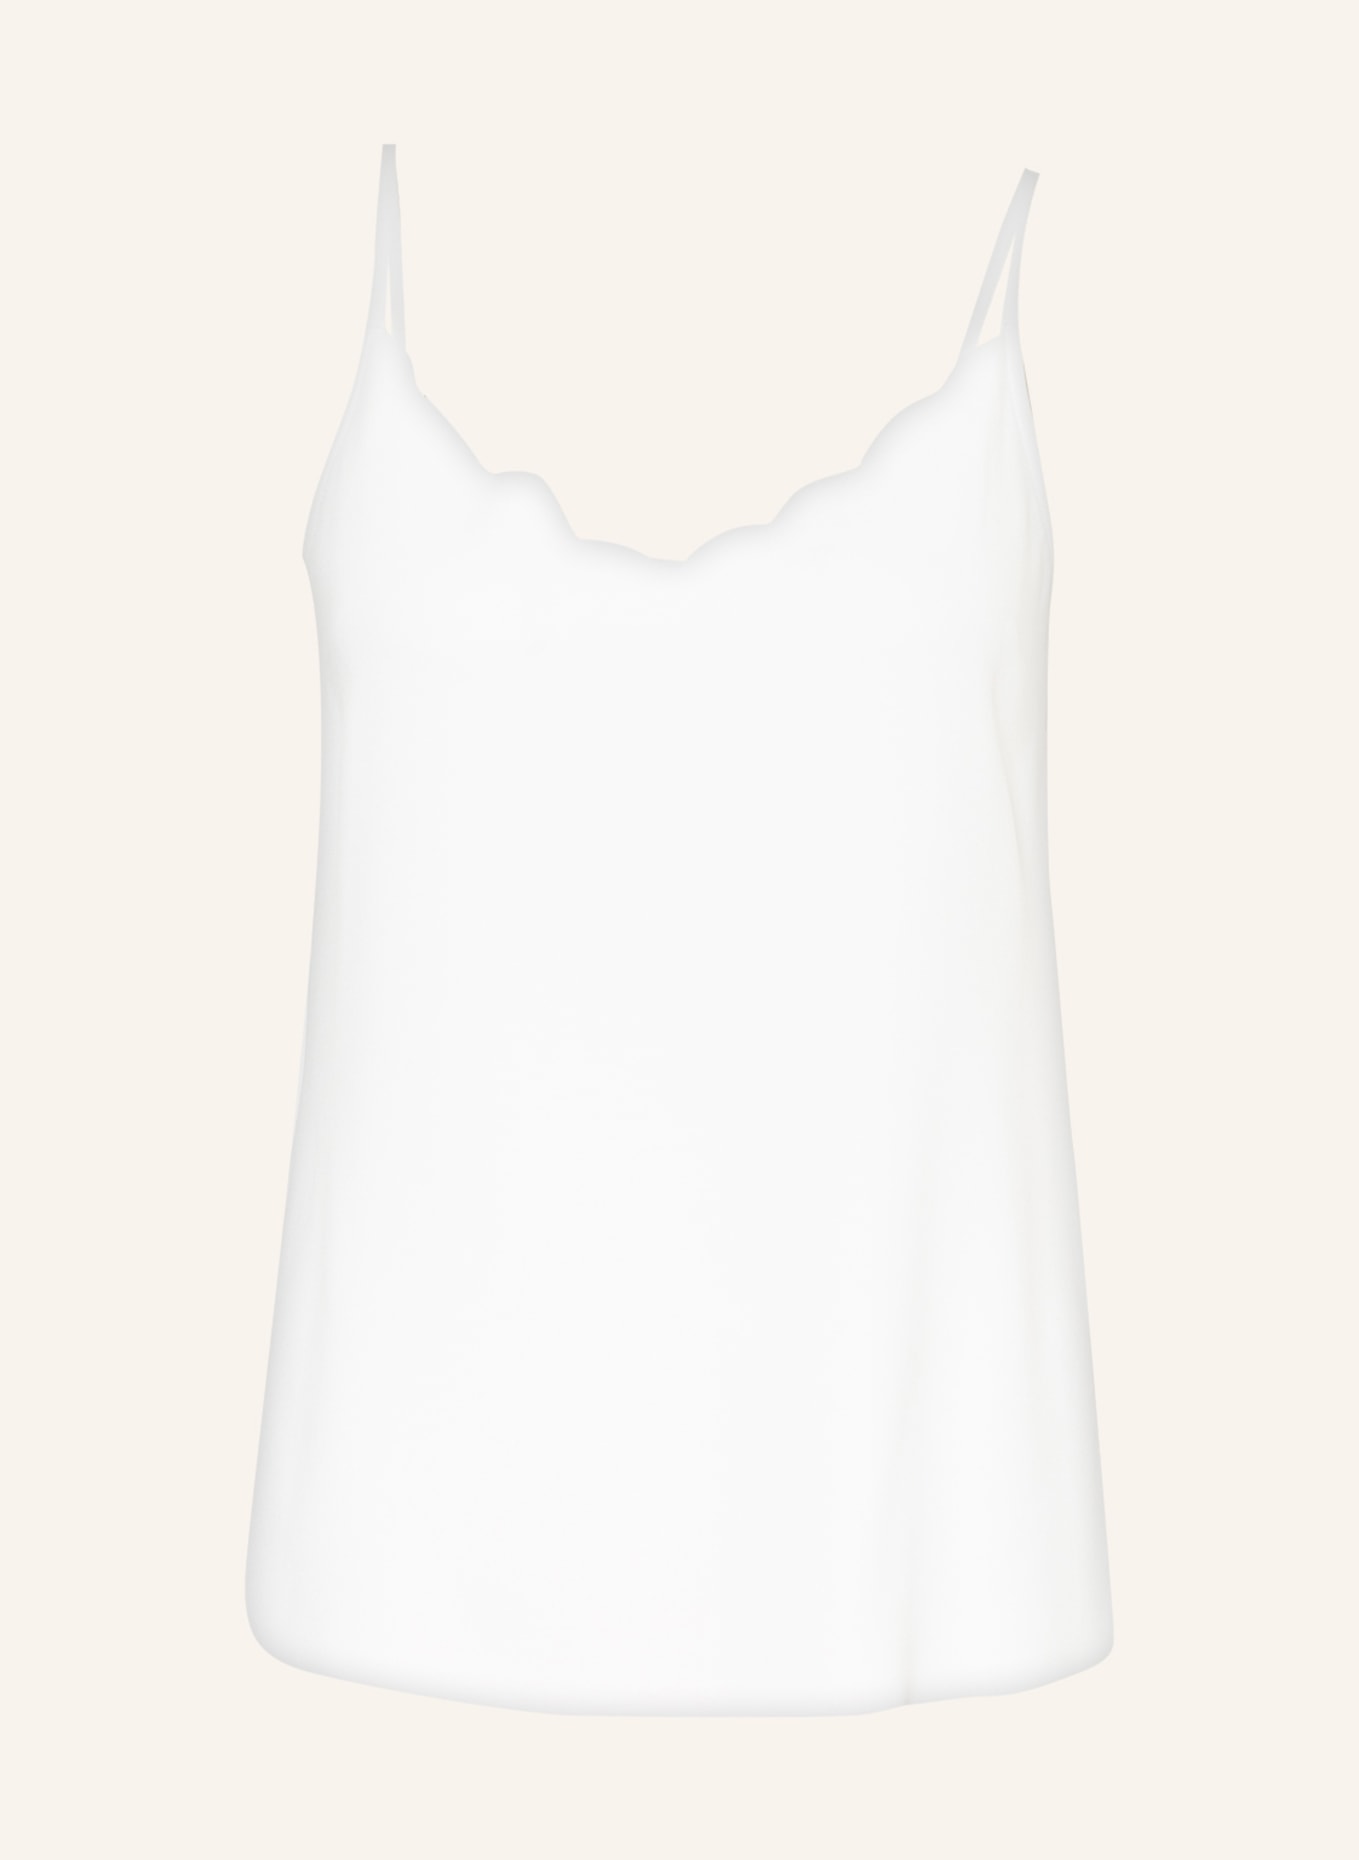 TED BAKER Top SIINA, Farbe: WEISS (Bild 1)